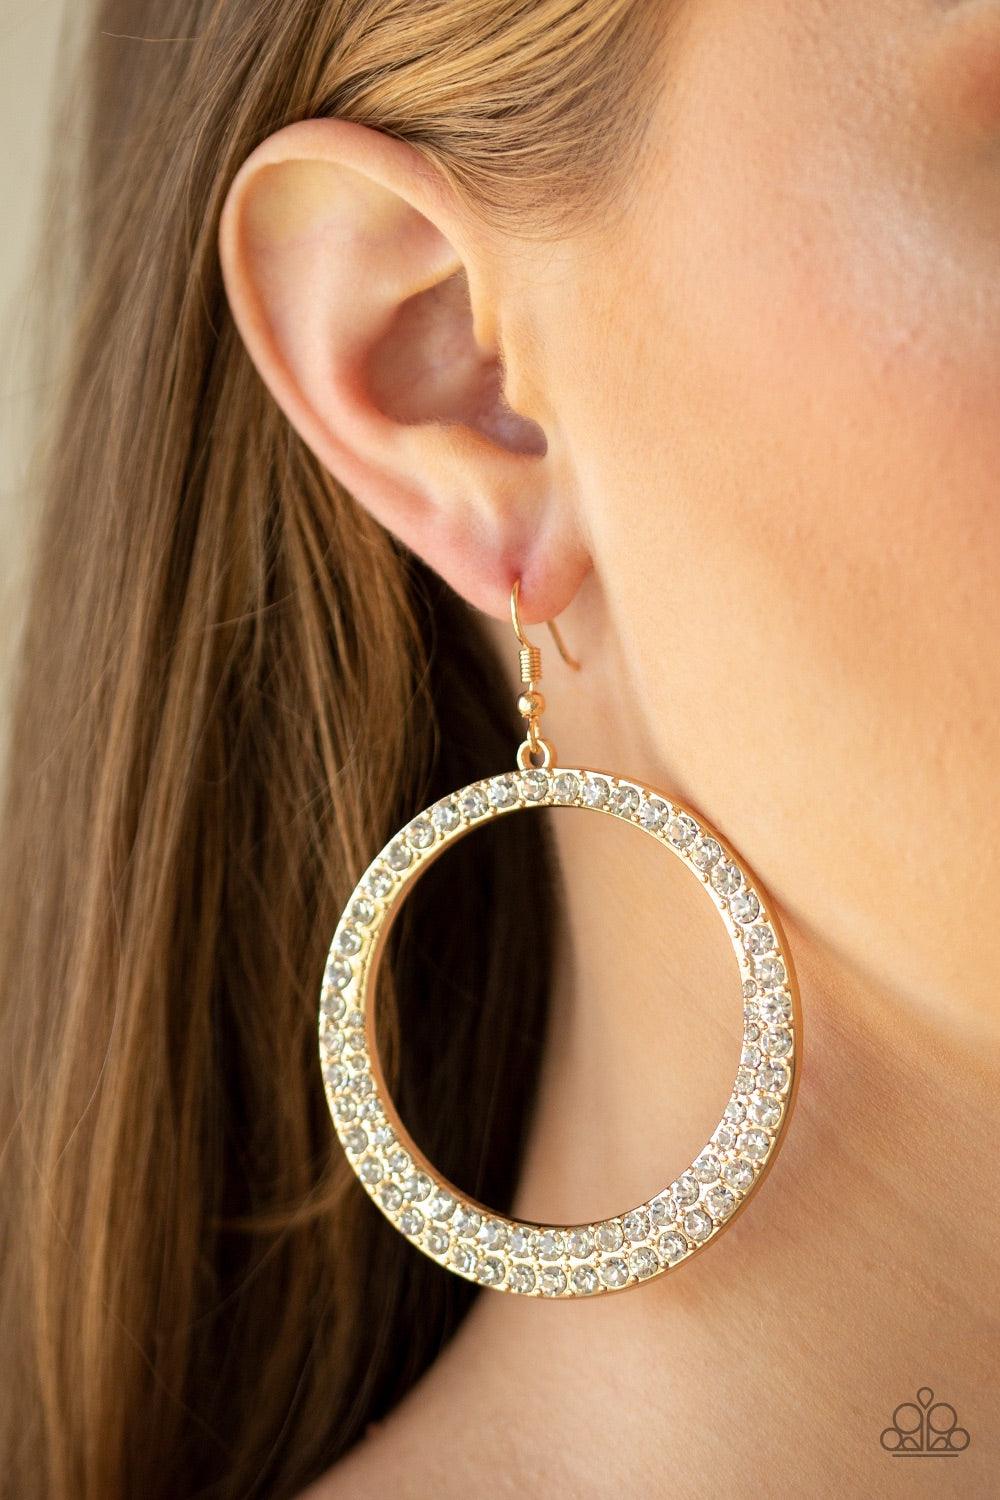 Paparazzi Accessories So Demanding - Gold An oversized gold hoop is encrusted in glittery white rhinestones for a blinding shimmer. Earring attaches to a standard fishhook fitting. Jewelry